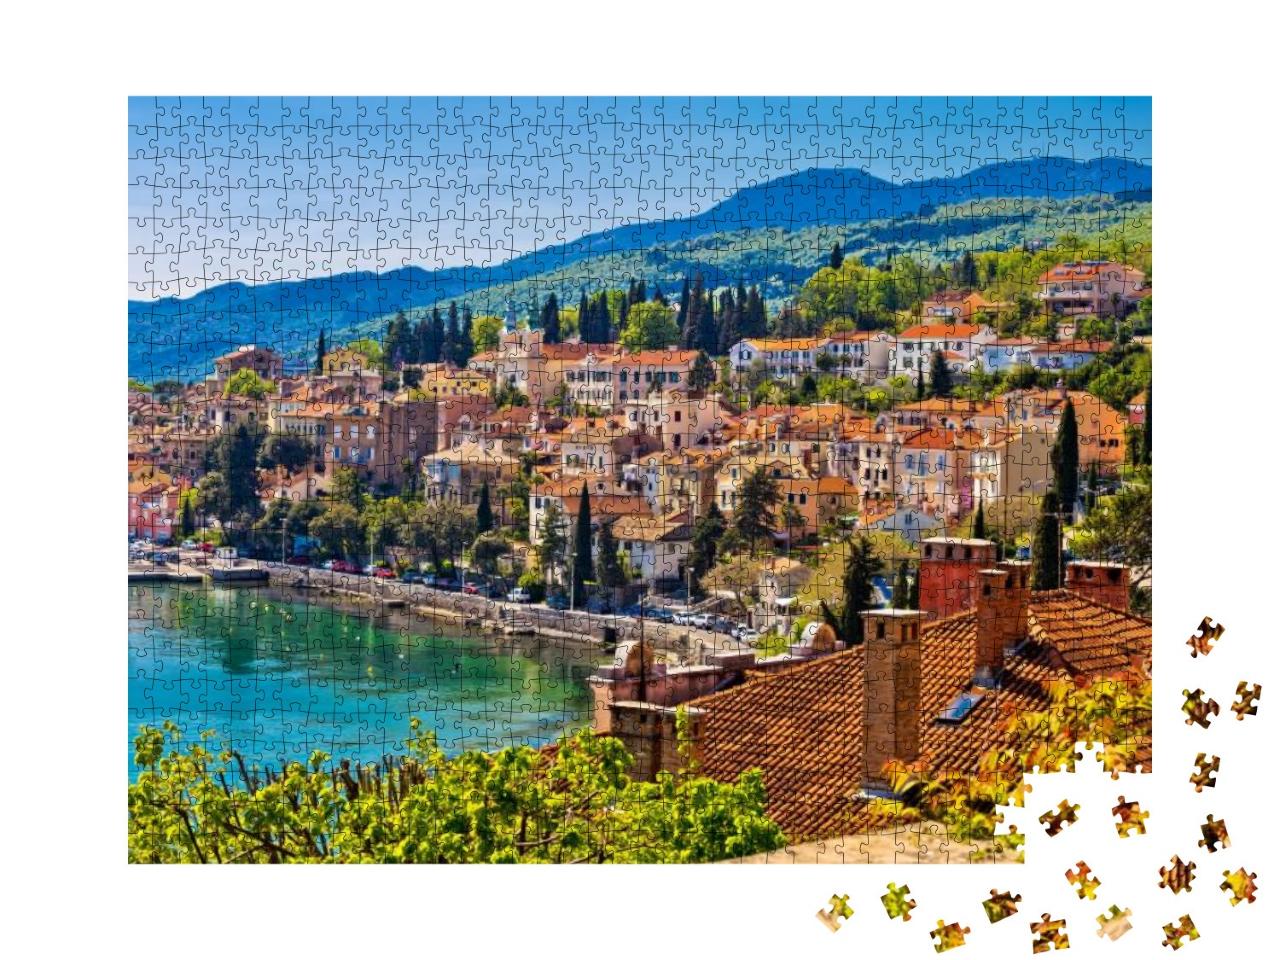 Town of Volosko Seafront View, Opatija Riviera of Croatia... Jigsaw Puzzle with 1000 pieces